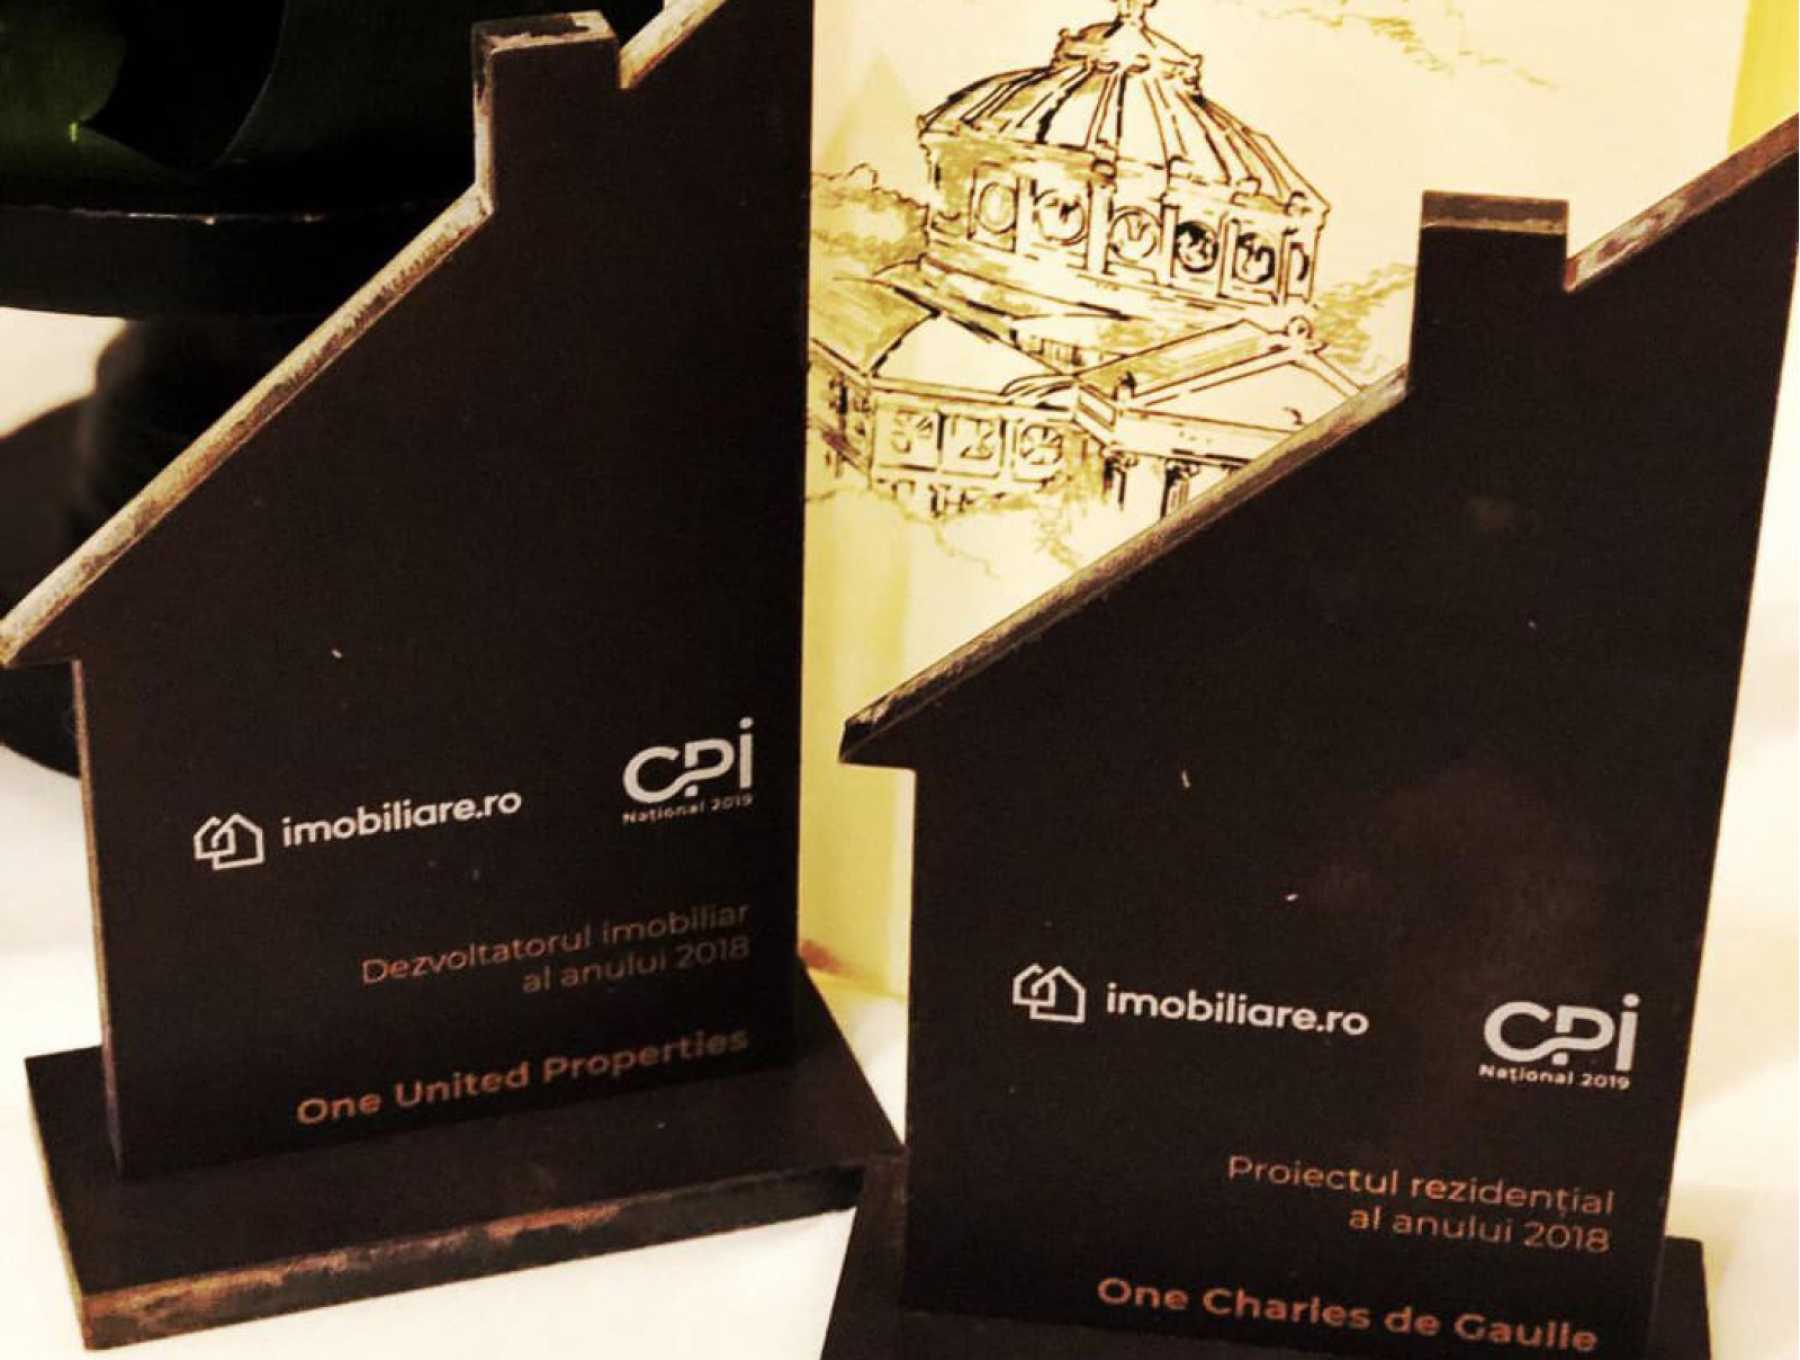 One United Properties, recipient of Developer of the Year & Residential Project of the Year Awards at CPI Național 2019